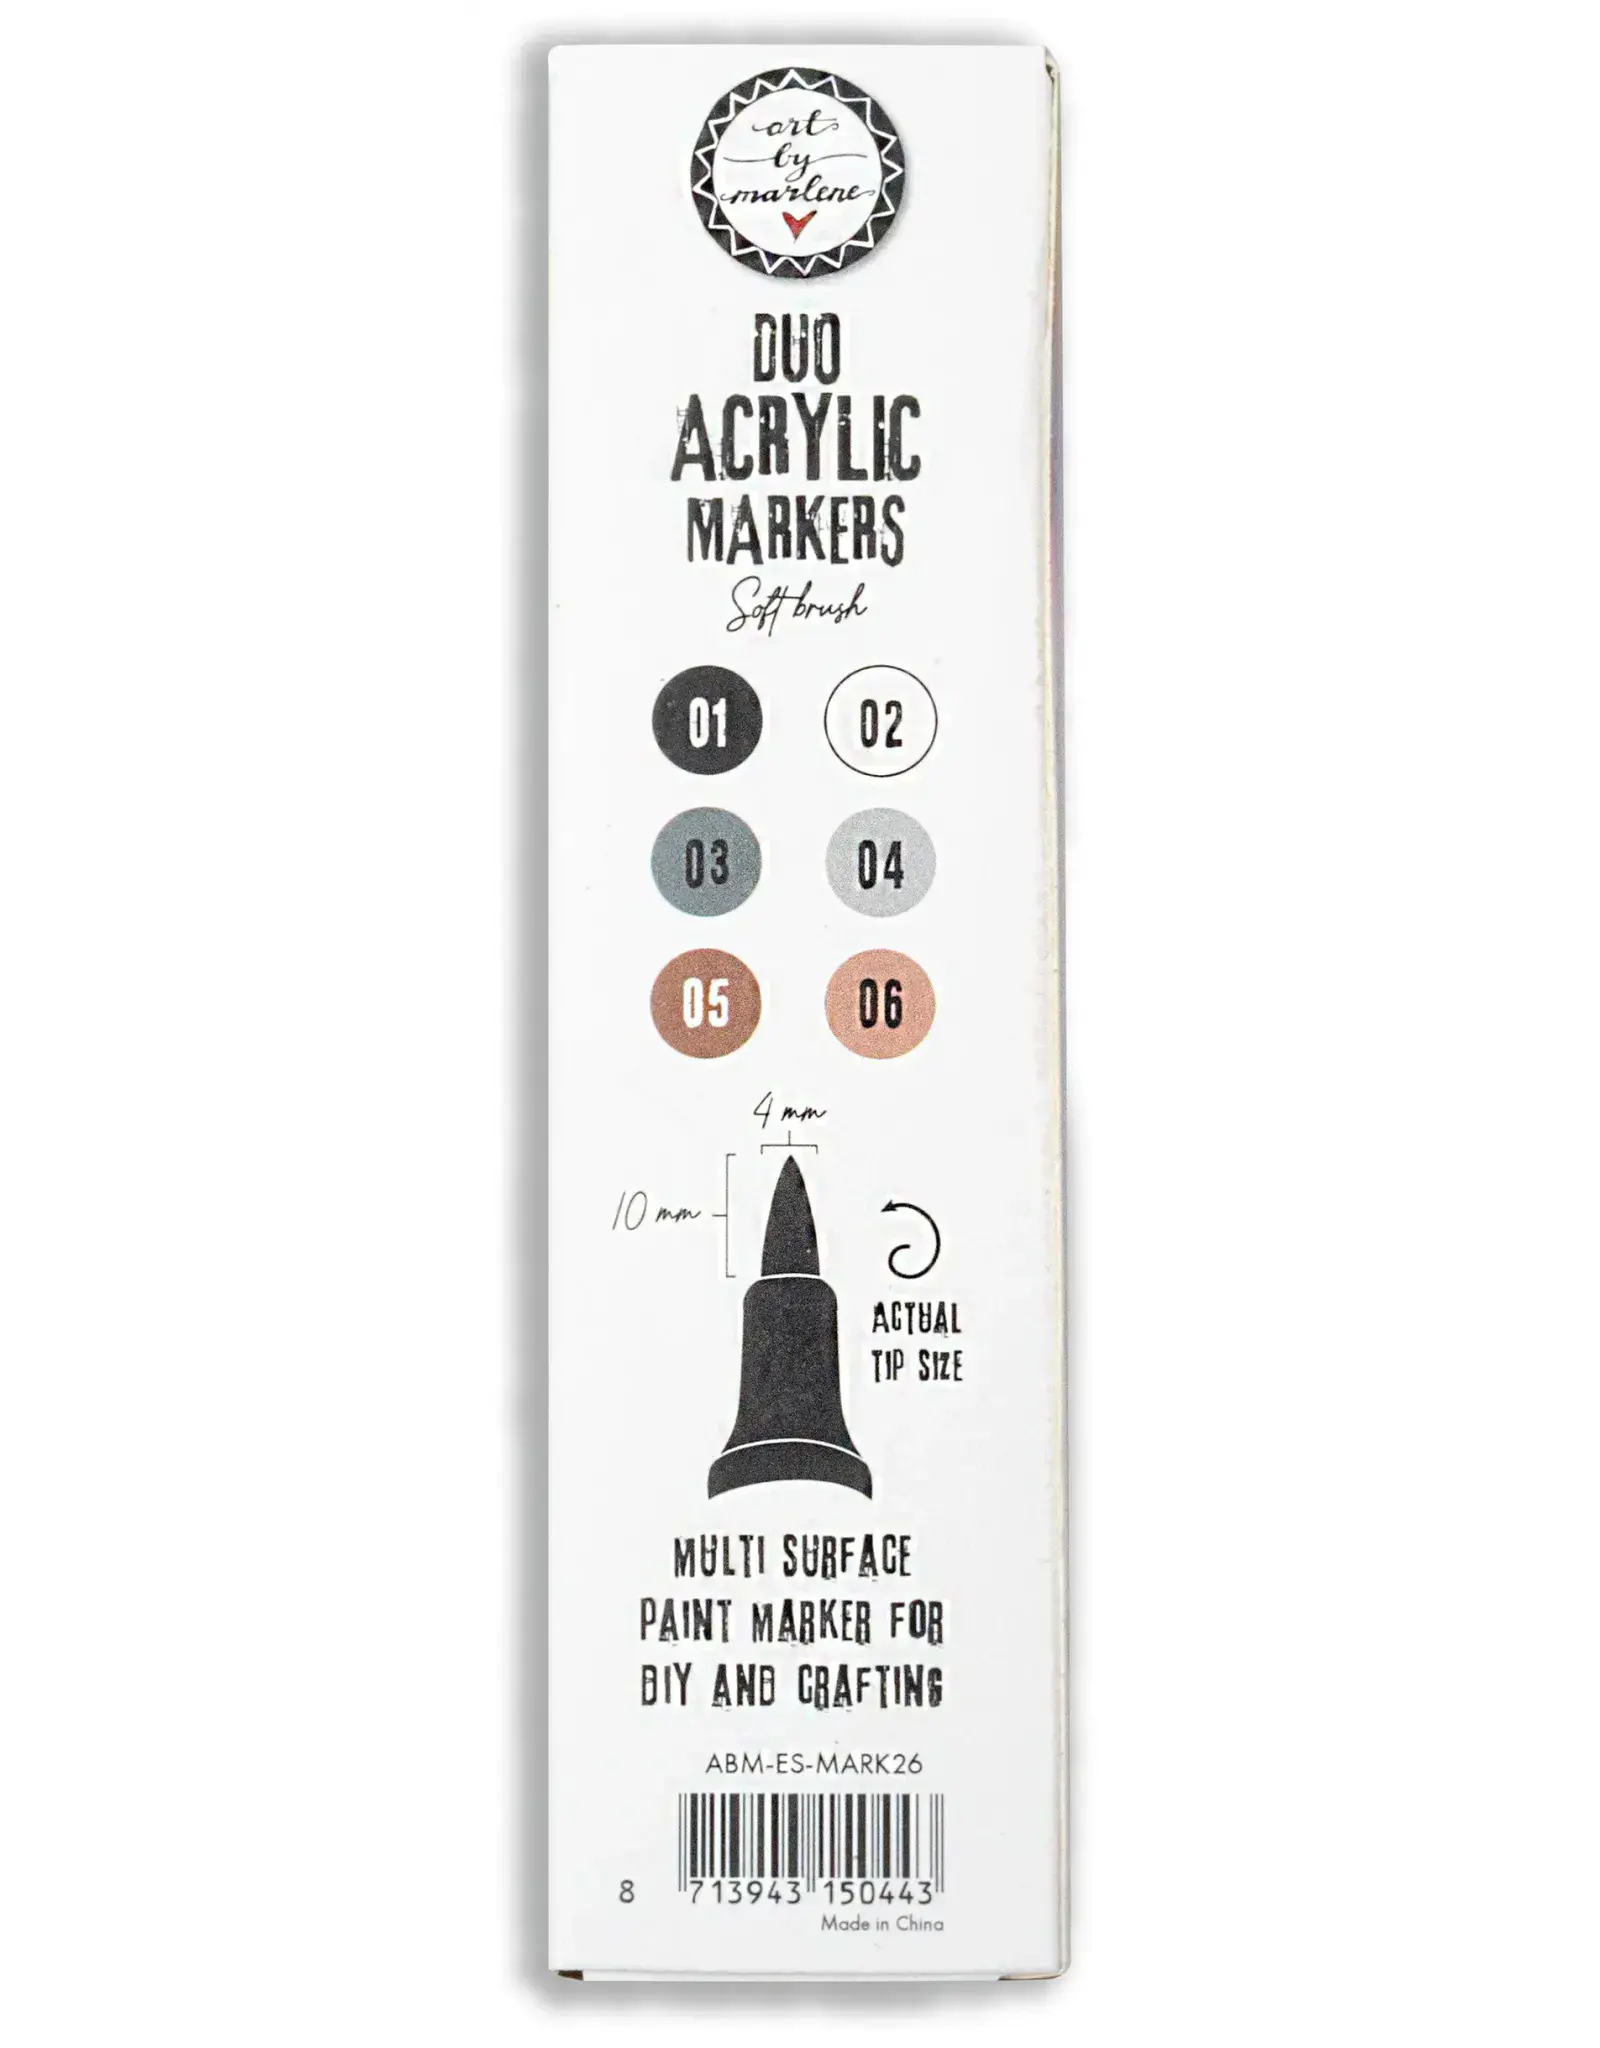 STUDIOLIGHT STUDIOLIGHT ART BY MARLENE ESSENTIALS COLLECTION DUO ACRYLIC MARKERS - BROWNS 3/PK